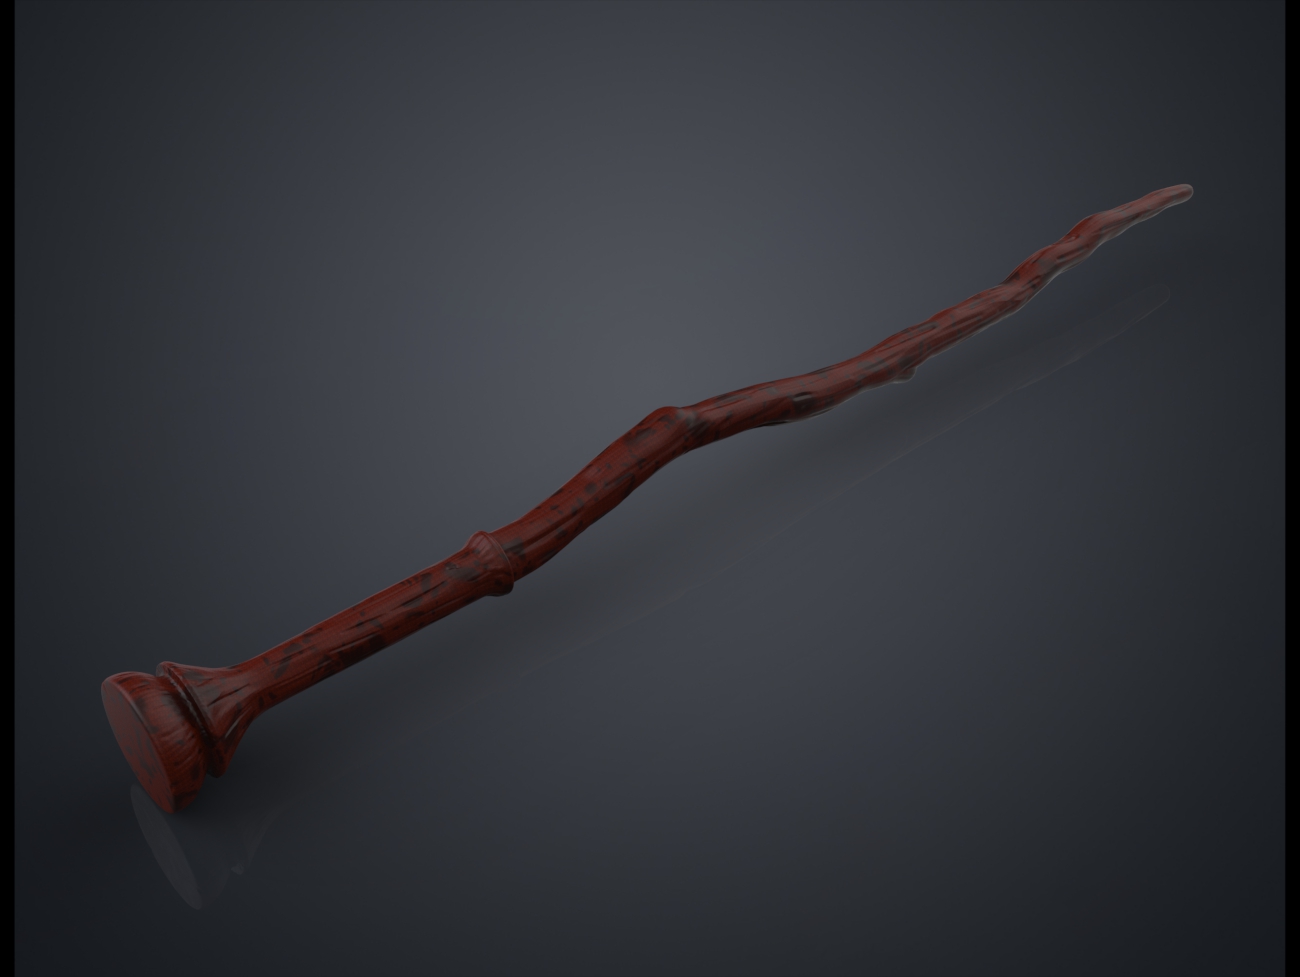 Open Book Harry Potter Wand Stand – 3Demon - 3D print models download